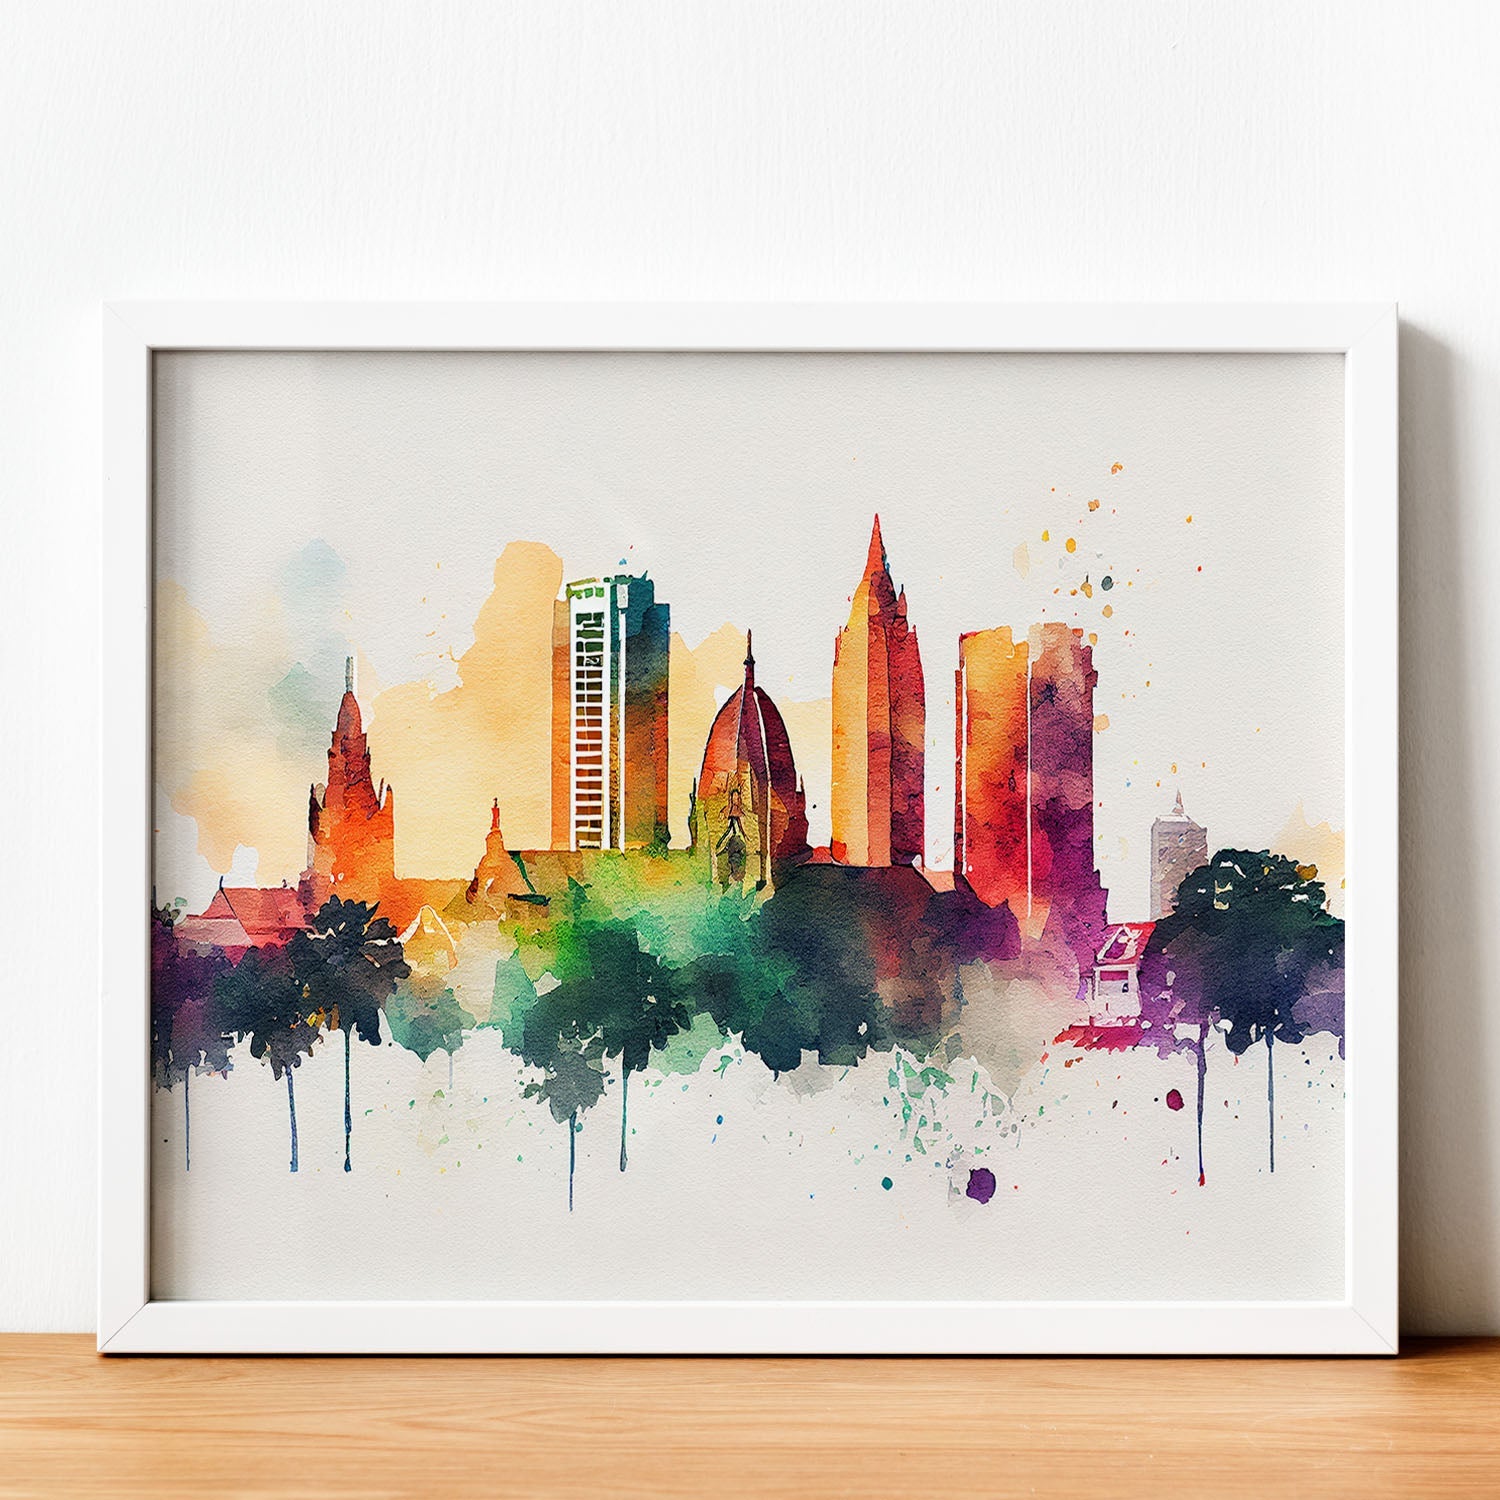 Nacnic watercolor of a skyline of the city of Colombo. Aesthetic Wall Art Prints for Bedroom or Living Room Design.-Artwork-Nacnic-A4-Sin Marco-Nacnic Estudio SL